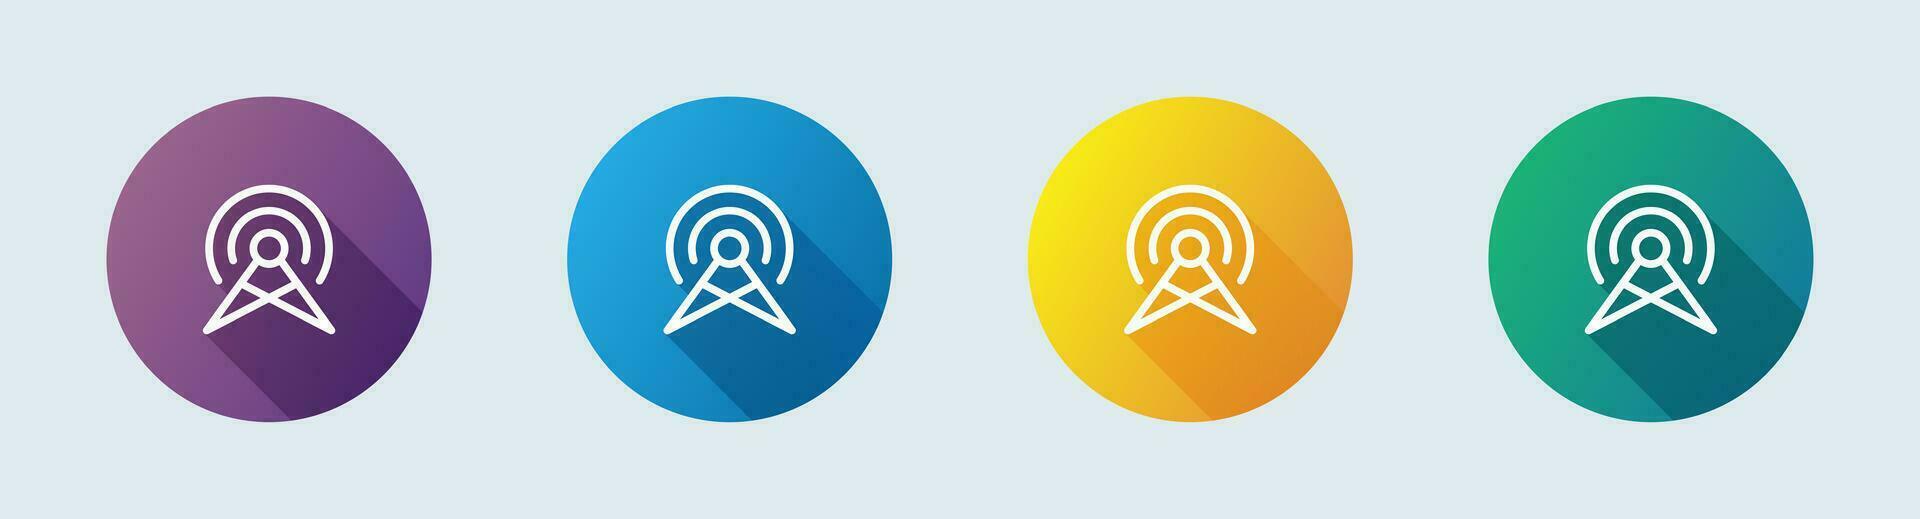 Broadcast line icon in flat design style. Online signs vector illustration.